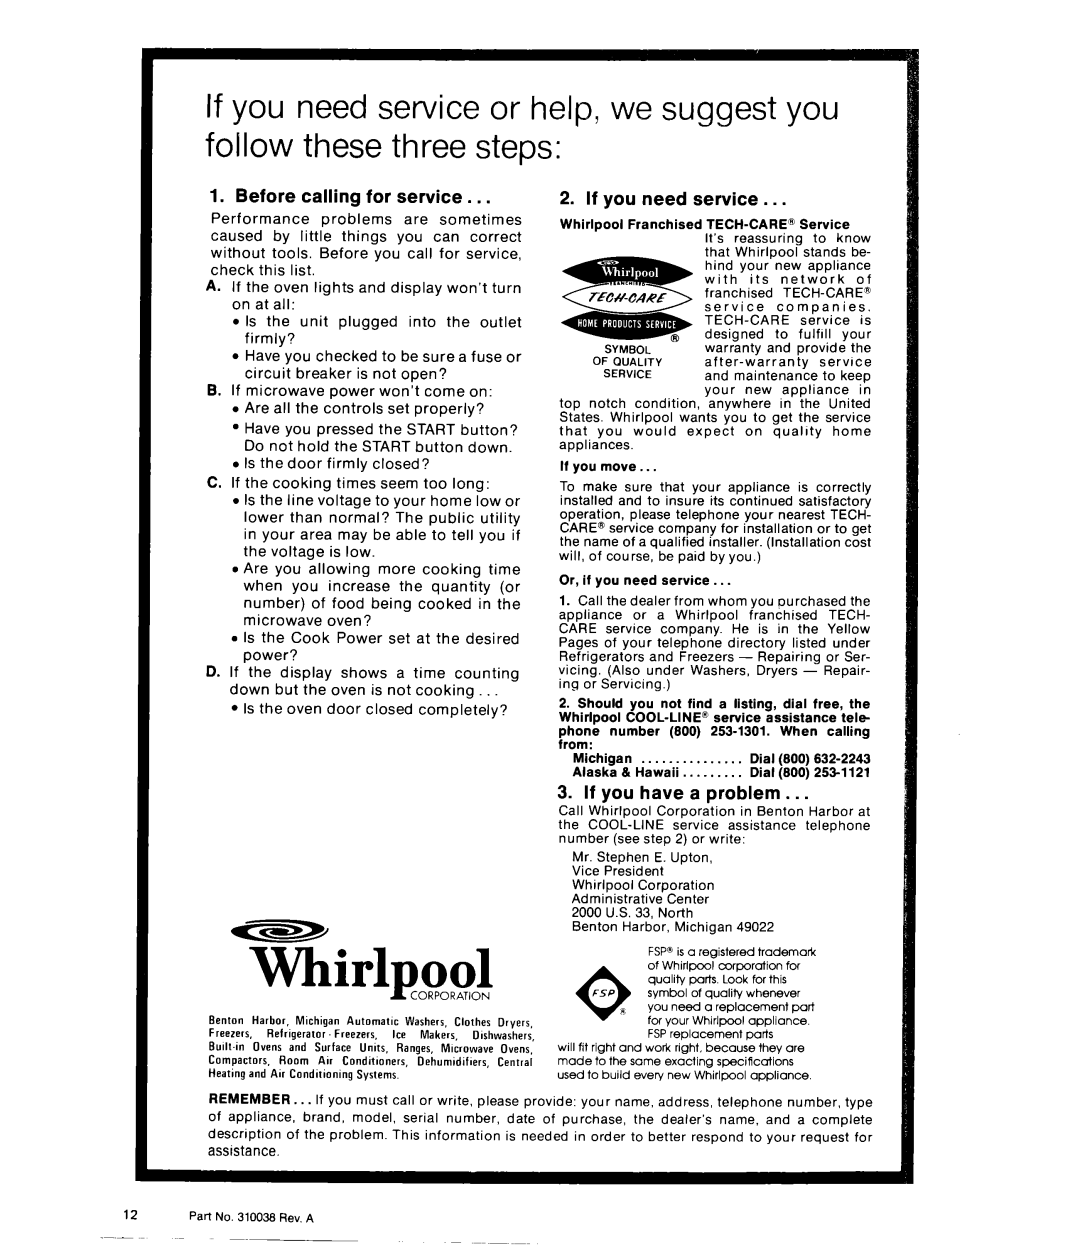 Whirlpool RJM7600 manual TLirlpool, ~--Id, ?/Ire, Before calling for service, If you need service, If you have a problem 